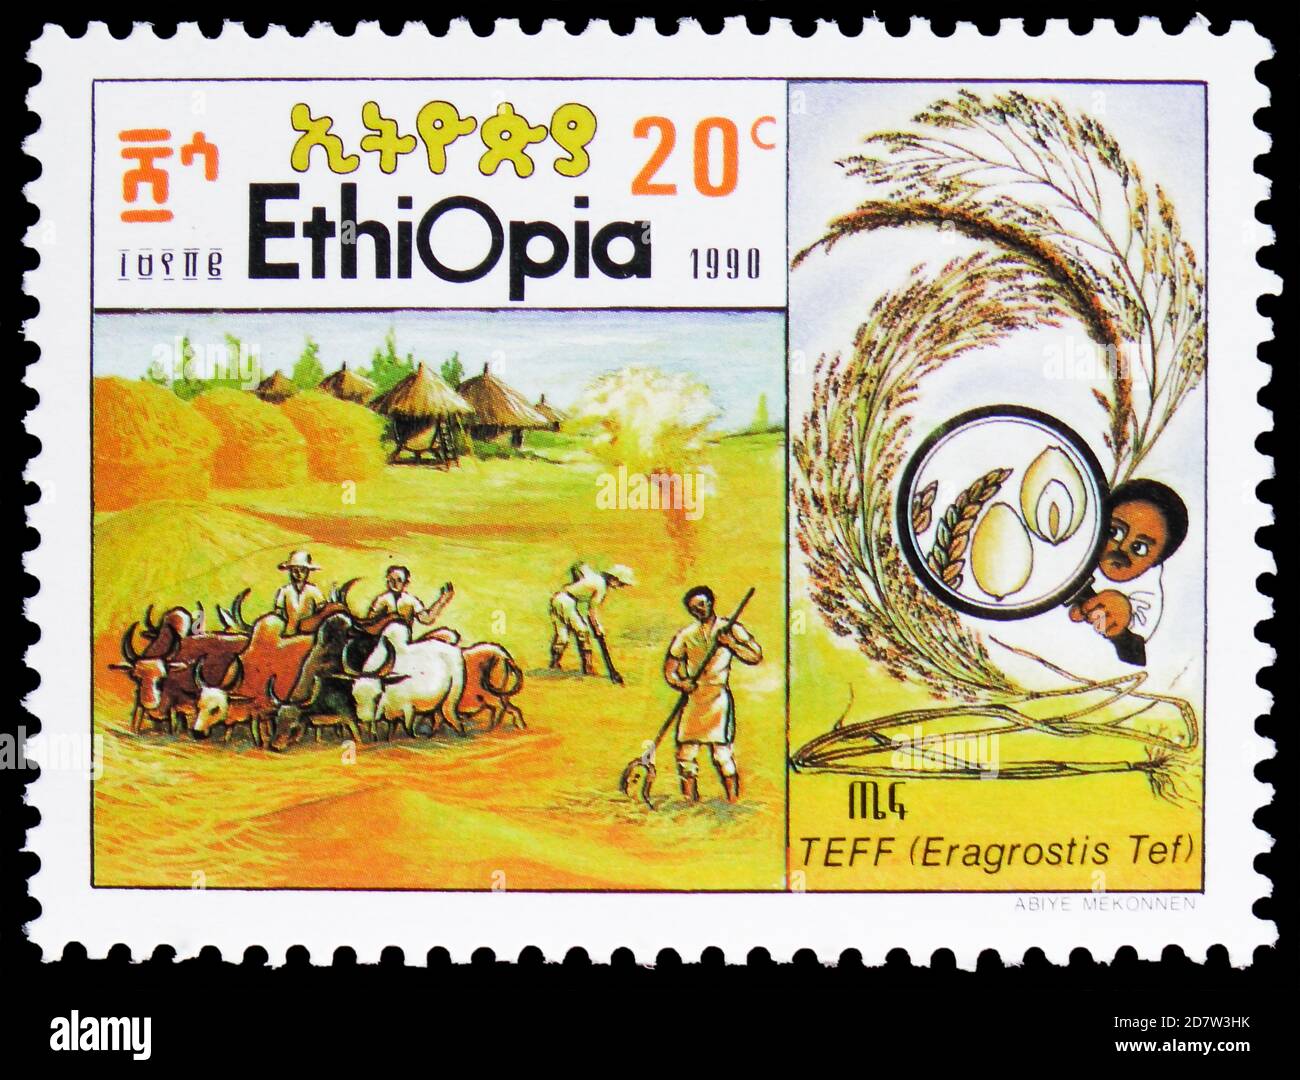 MOSCOW, RUSSIA - OCTOBER 9, 2020: Postage stamp printed in Ethiopia shows Cattle, Cultivation of cereal Tef (Eragrostis tef) serie, circa 1990 Stock Photo